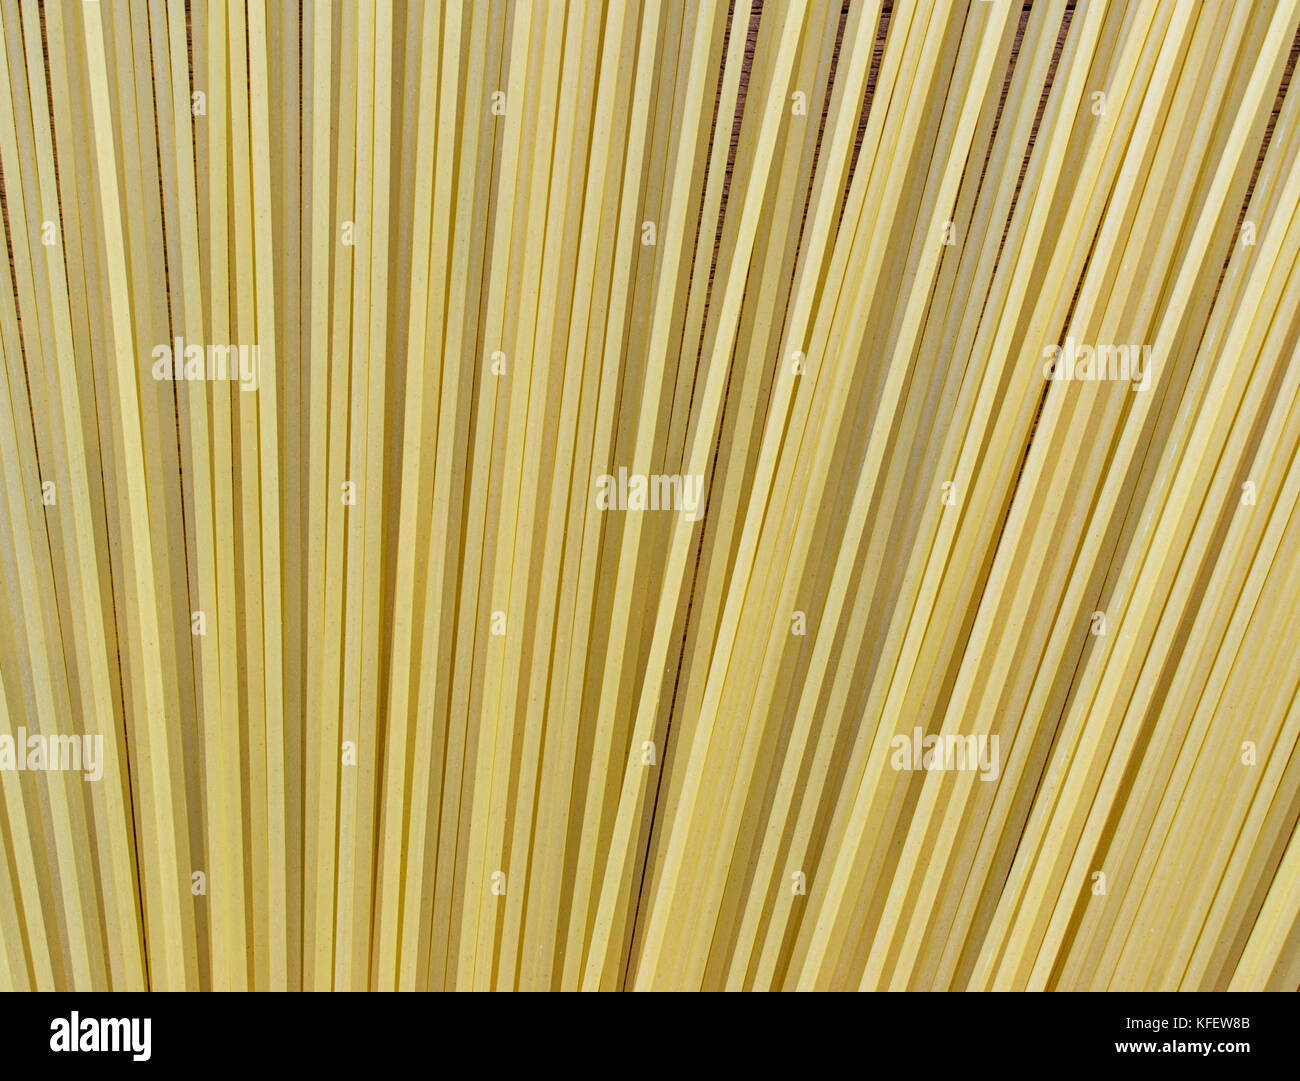 Spaghetti uncooked pasta on top of a light brown wooden surface, with lots of wheat flour sprinkled on top and around Stock Photo